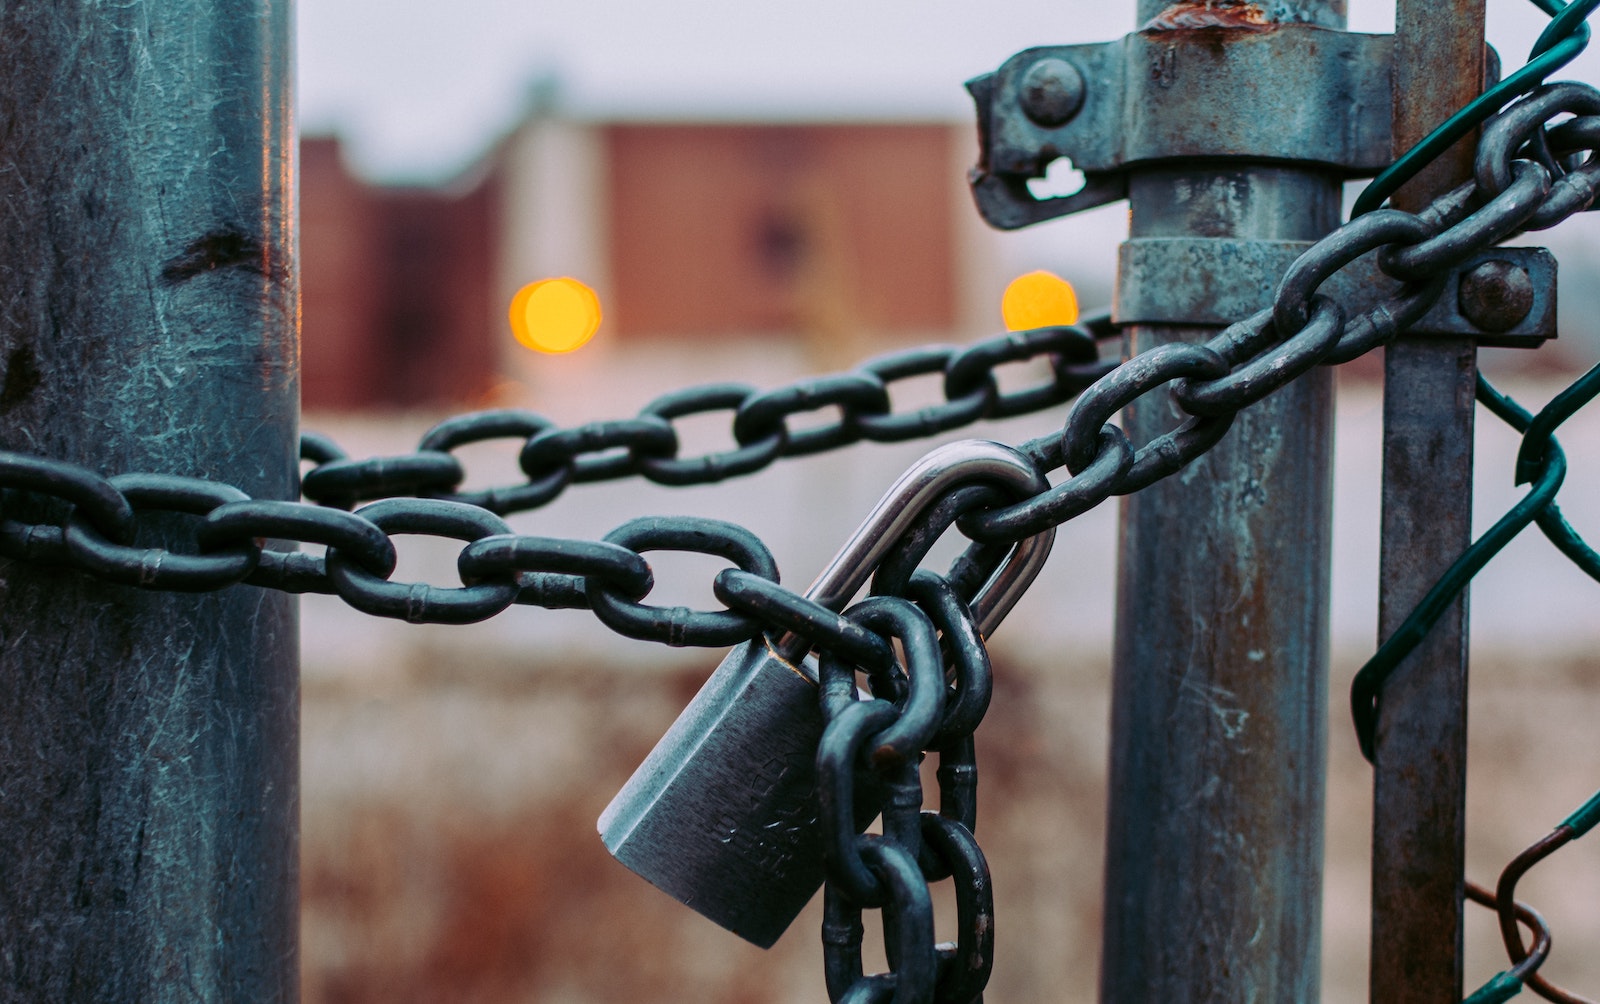 A padlocked chain keeps a fence or gate closed